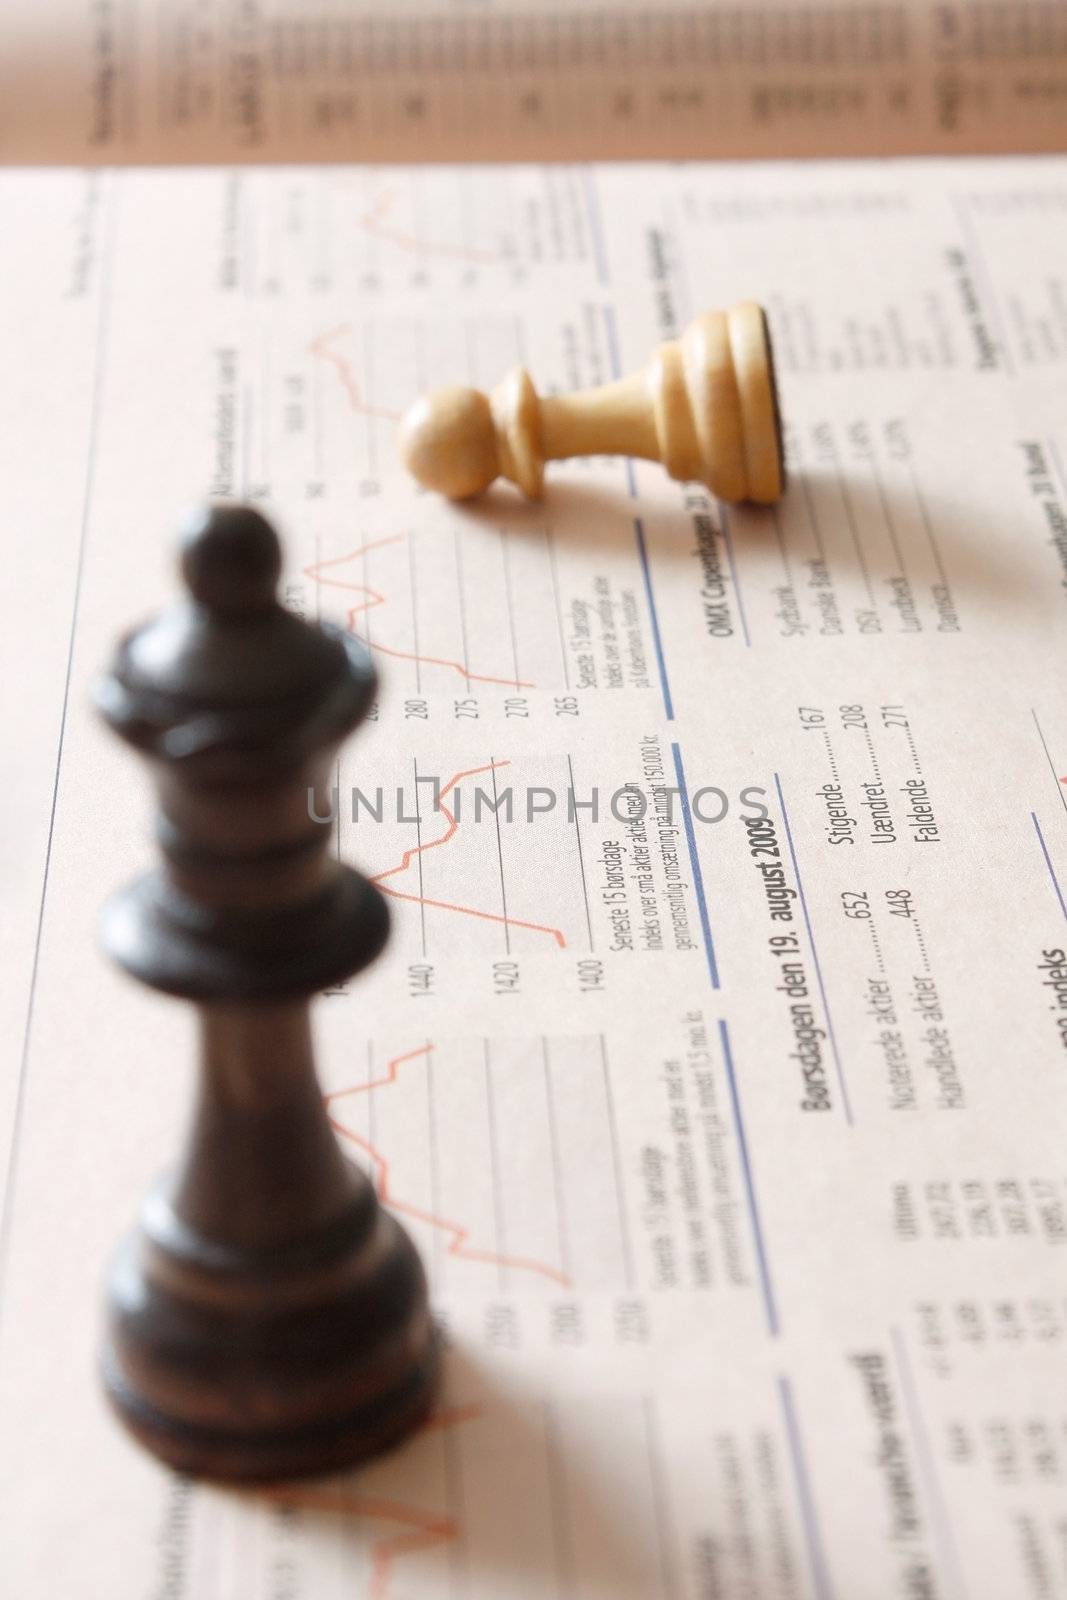 Chess as a metaphor for stock markets